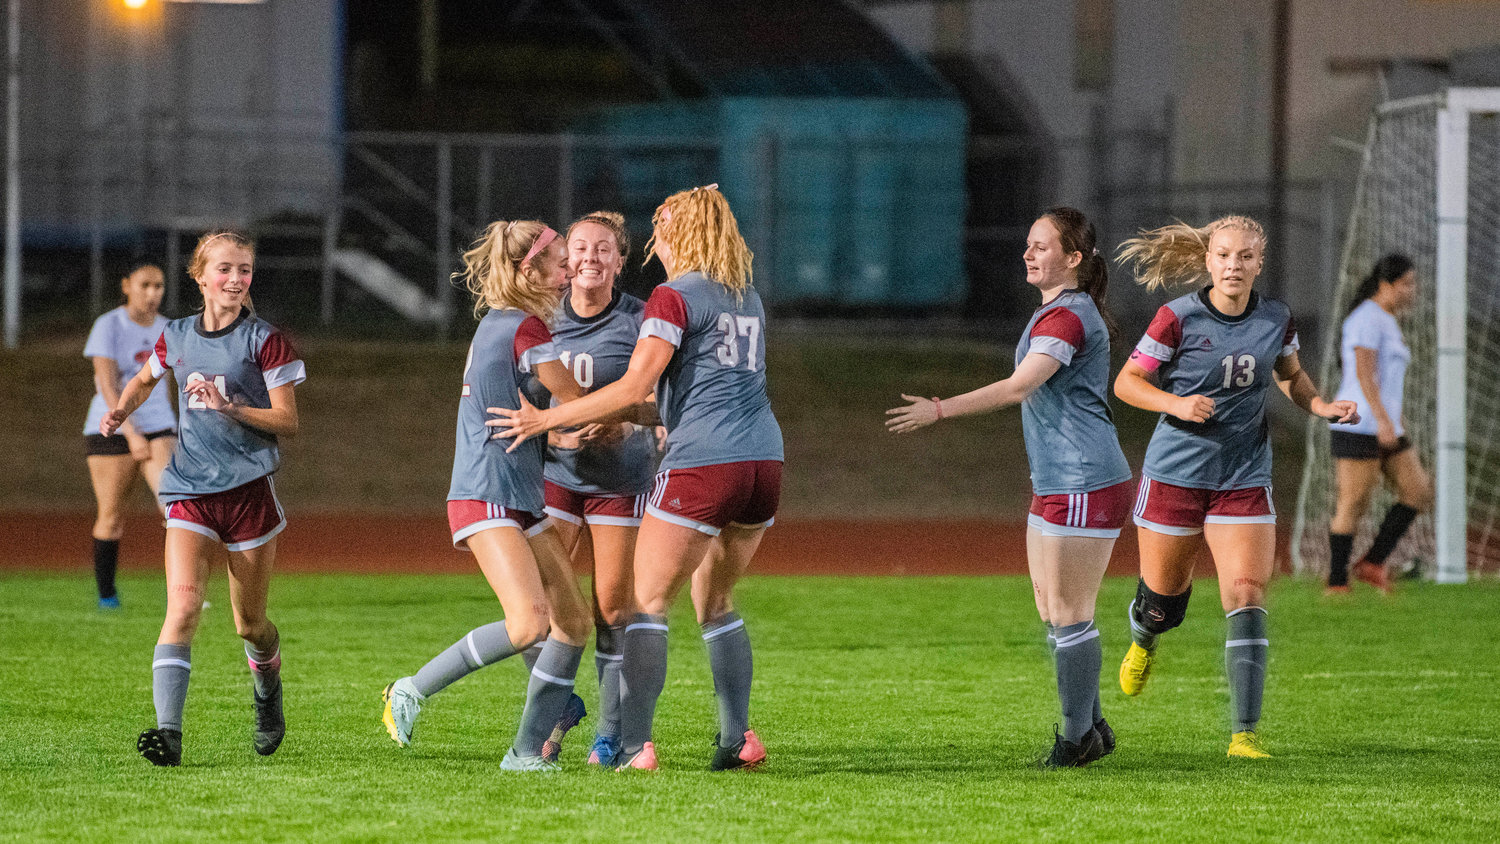 The Bearcats celebrate their second goal in a 2-1 win over Centralia on Oct. 18 in Chehalis.